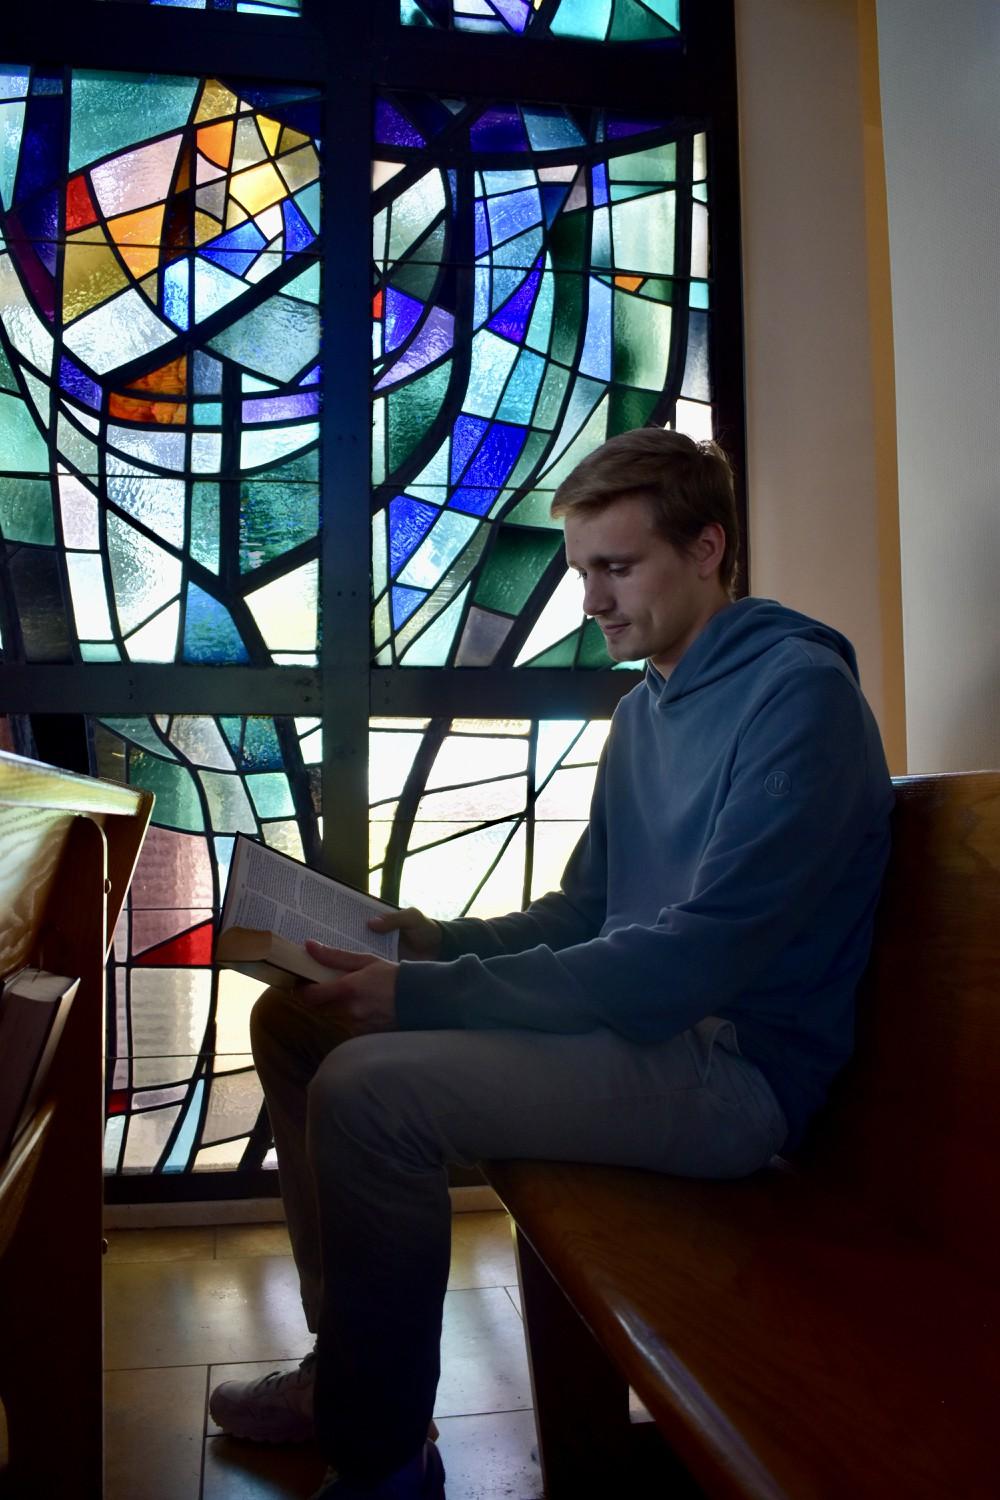 Junior Brent Long sits and reads the Bible in Stauffer Chapel. Long said his faith has been challenged while at Pepperdine.